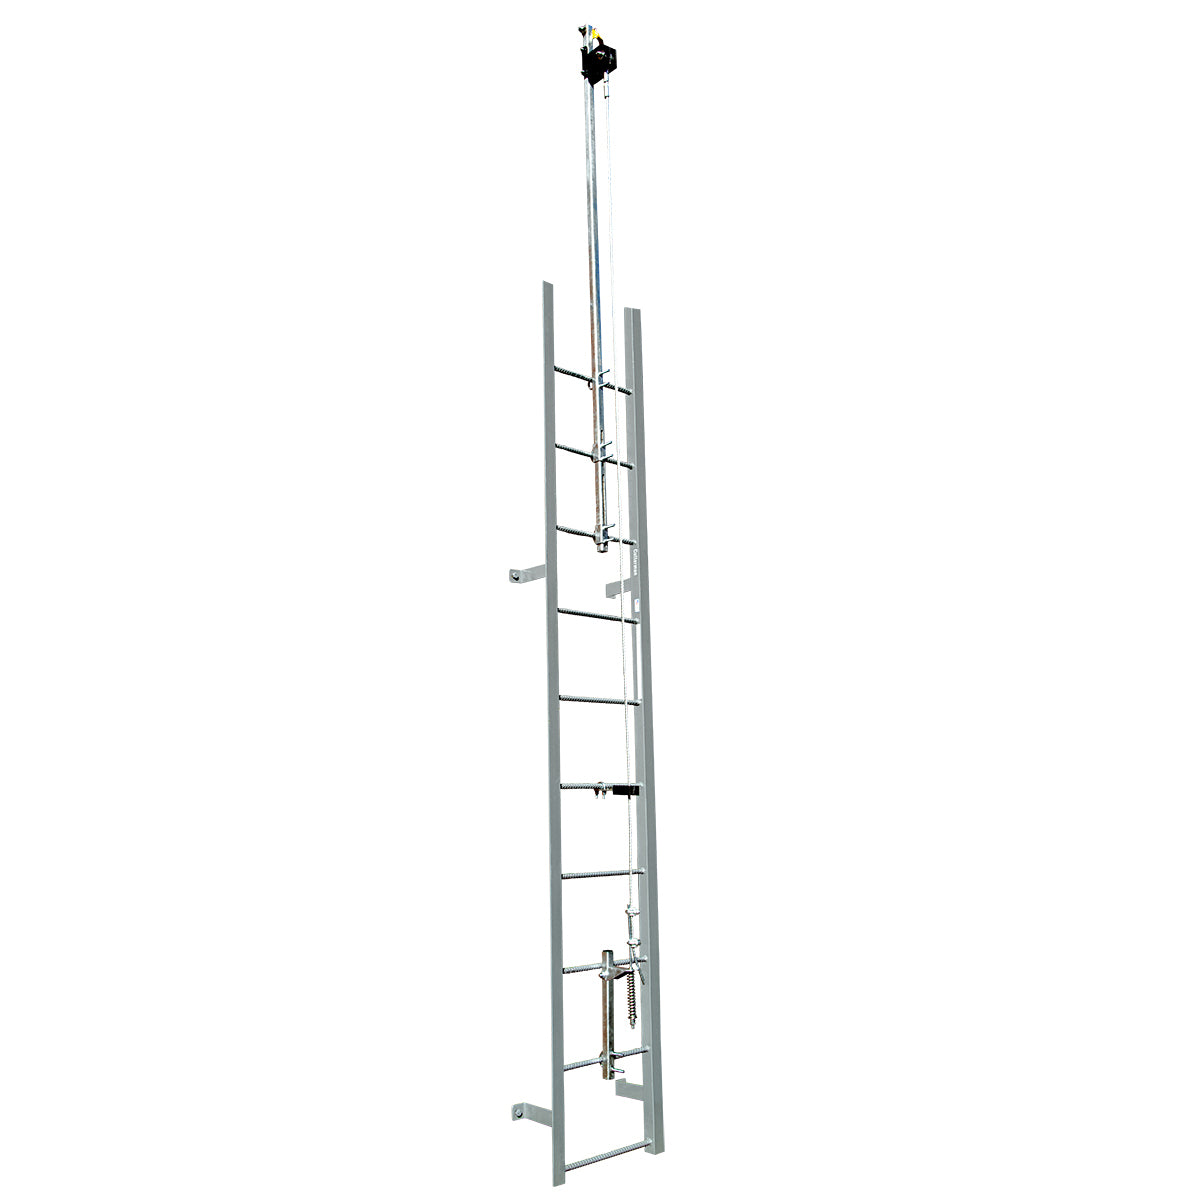 50' Extended Top Ladder Climb System, Complete Kit